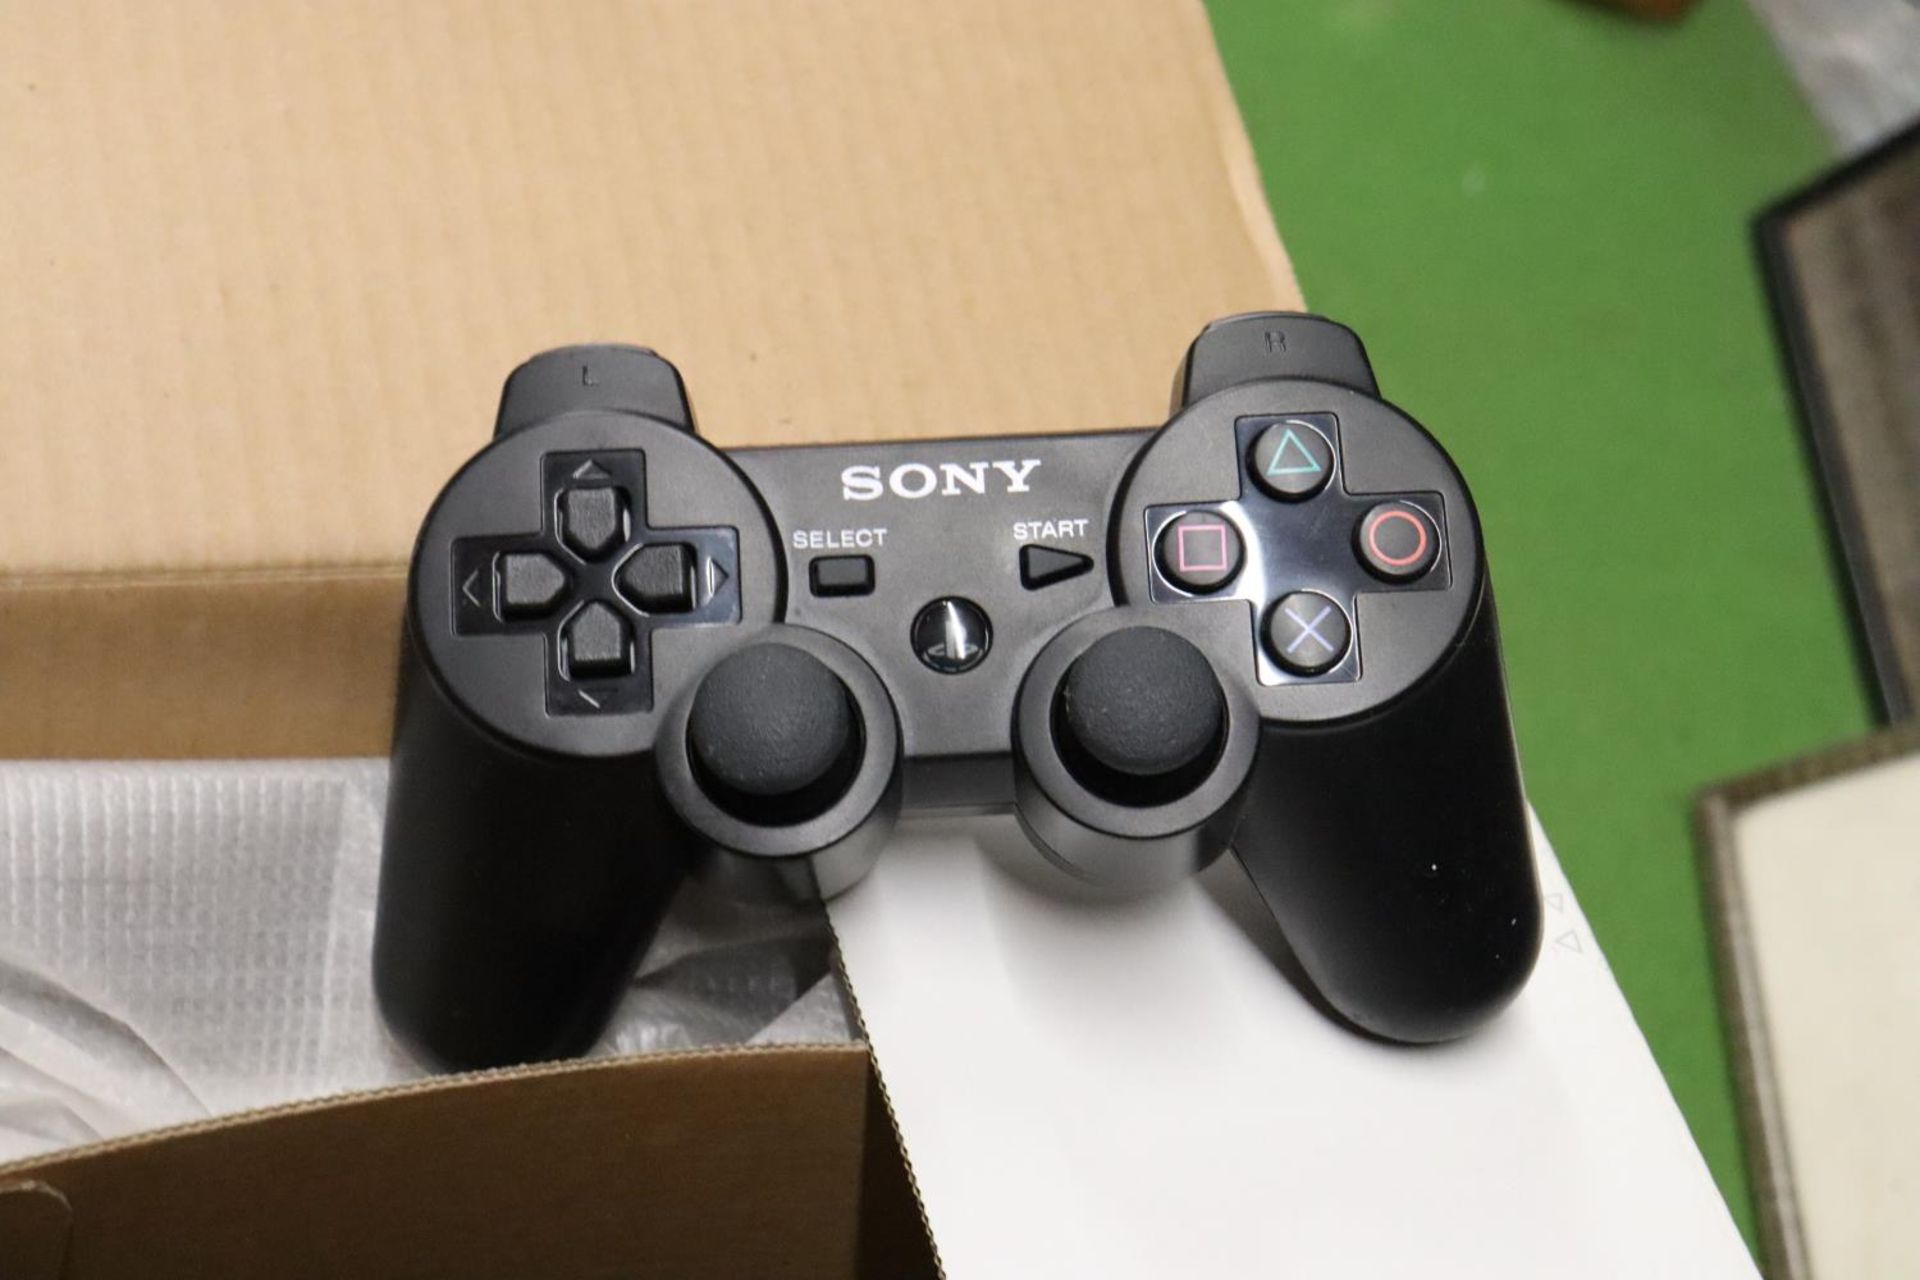 A BOXED PLAYSTATION 3, 160 GB WITH A CONTROLLER AND POWER CABLE - Image 2 of 5